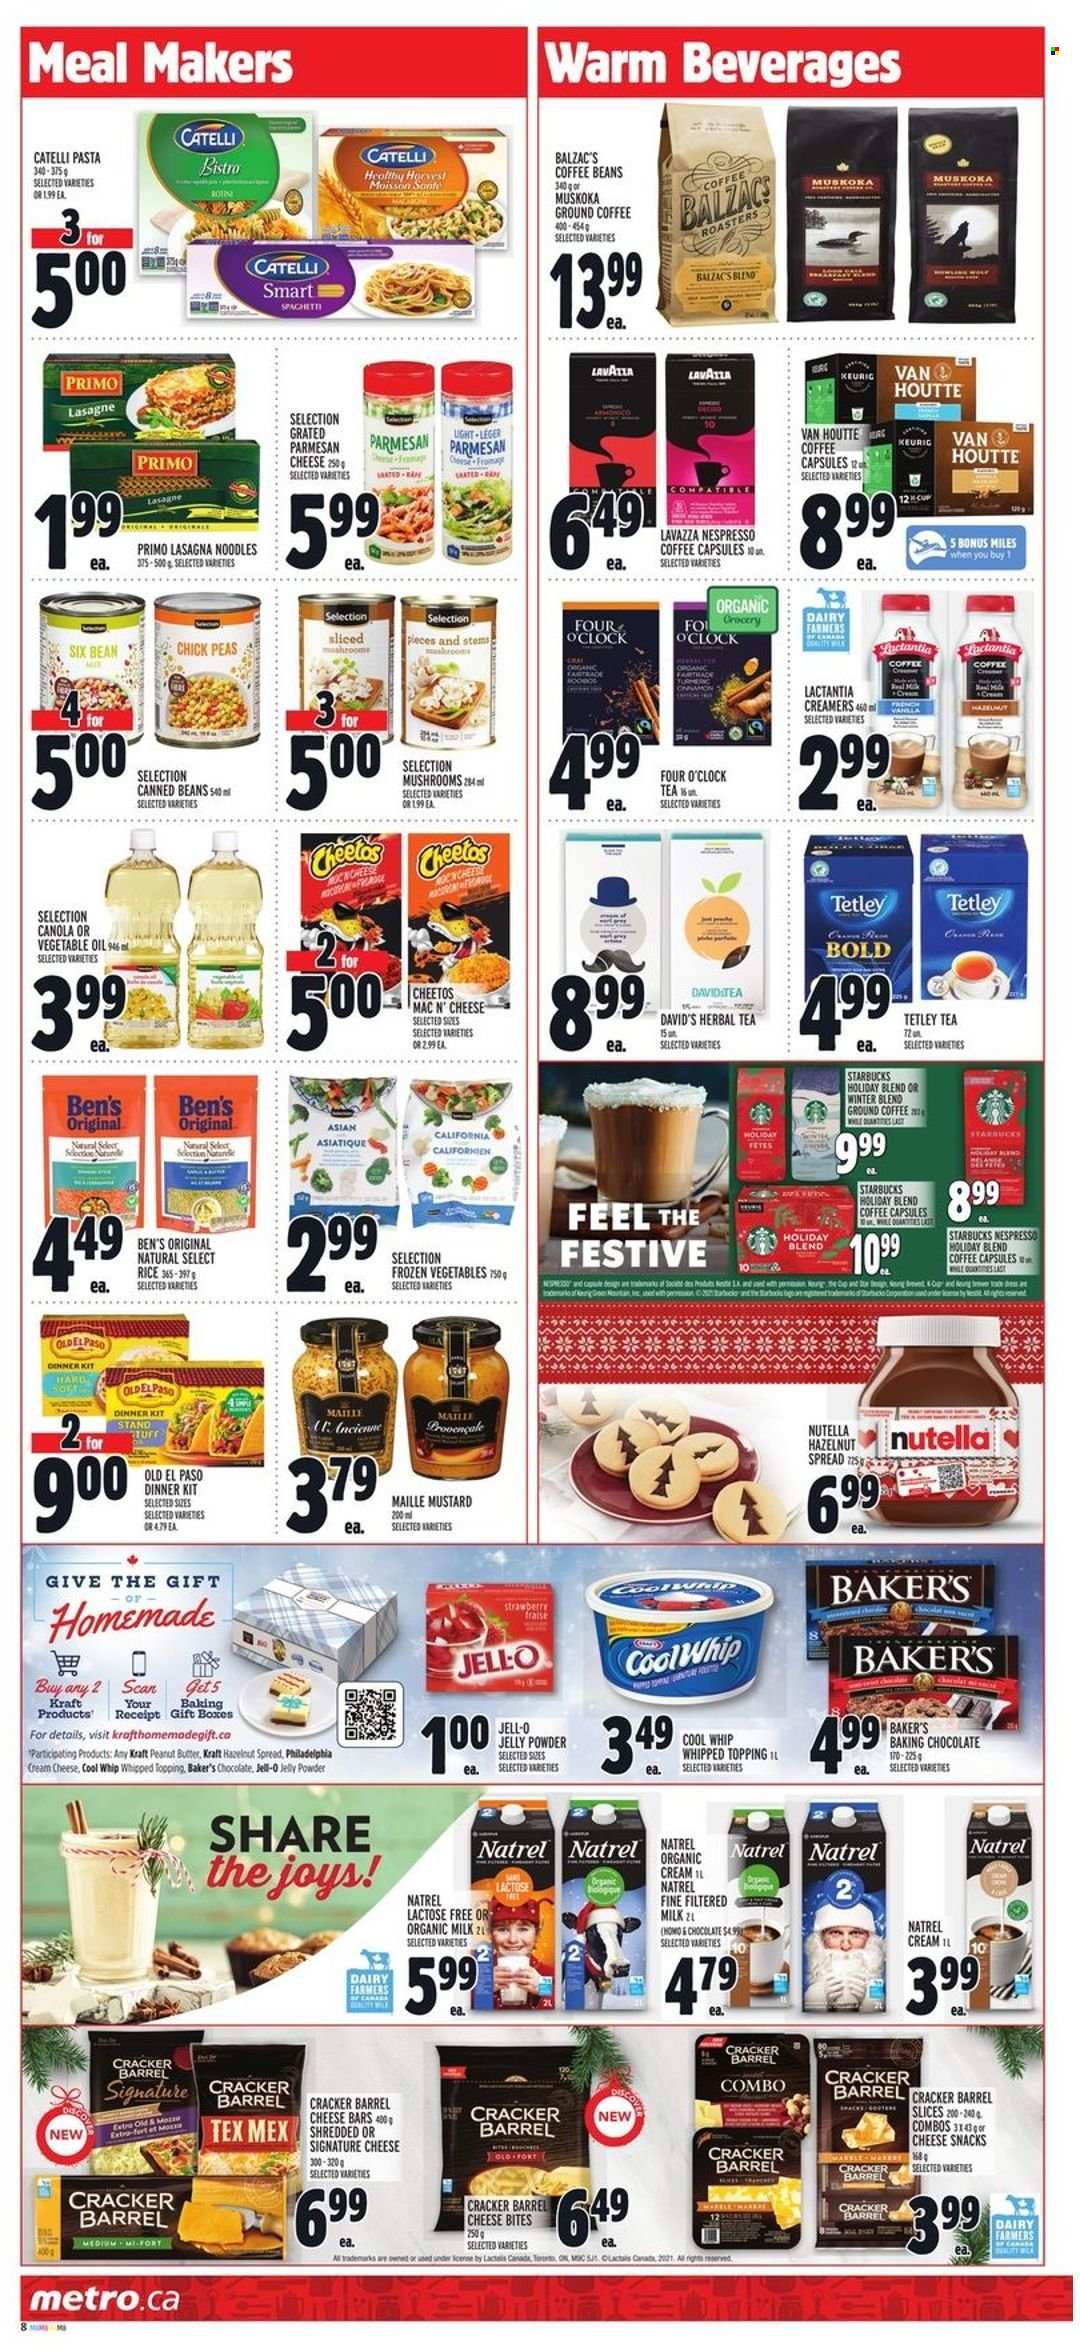 thumbnail - Metro Flyer - December 02, 2021 - December 08, 2021 - Sales products - mushrooms, Old El Paso, peas, pasta, dinner kit, noodles, lasagna meal, Kraft®, cream cheese, parmesan, cheese, organic milk, Cool Whip, frozen vegetables, chocolate, snack, jelly, crackers, Cheetos, topping, Jell-O, rice, mustard, oil, peanut butter, hazelnut spread, tea, herbal tea, Nespresso, coffee beans, ground coffee, coffee capsules, Starbucks, Keurig, Lavazza, clock, gift box, Philadelphia, Nutella. Page 10.